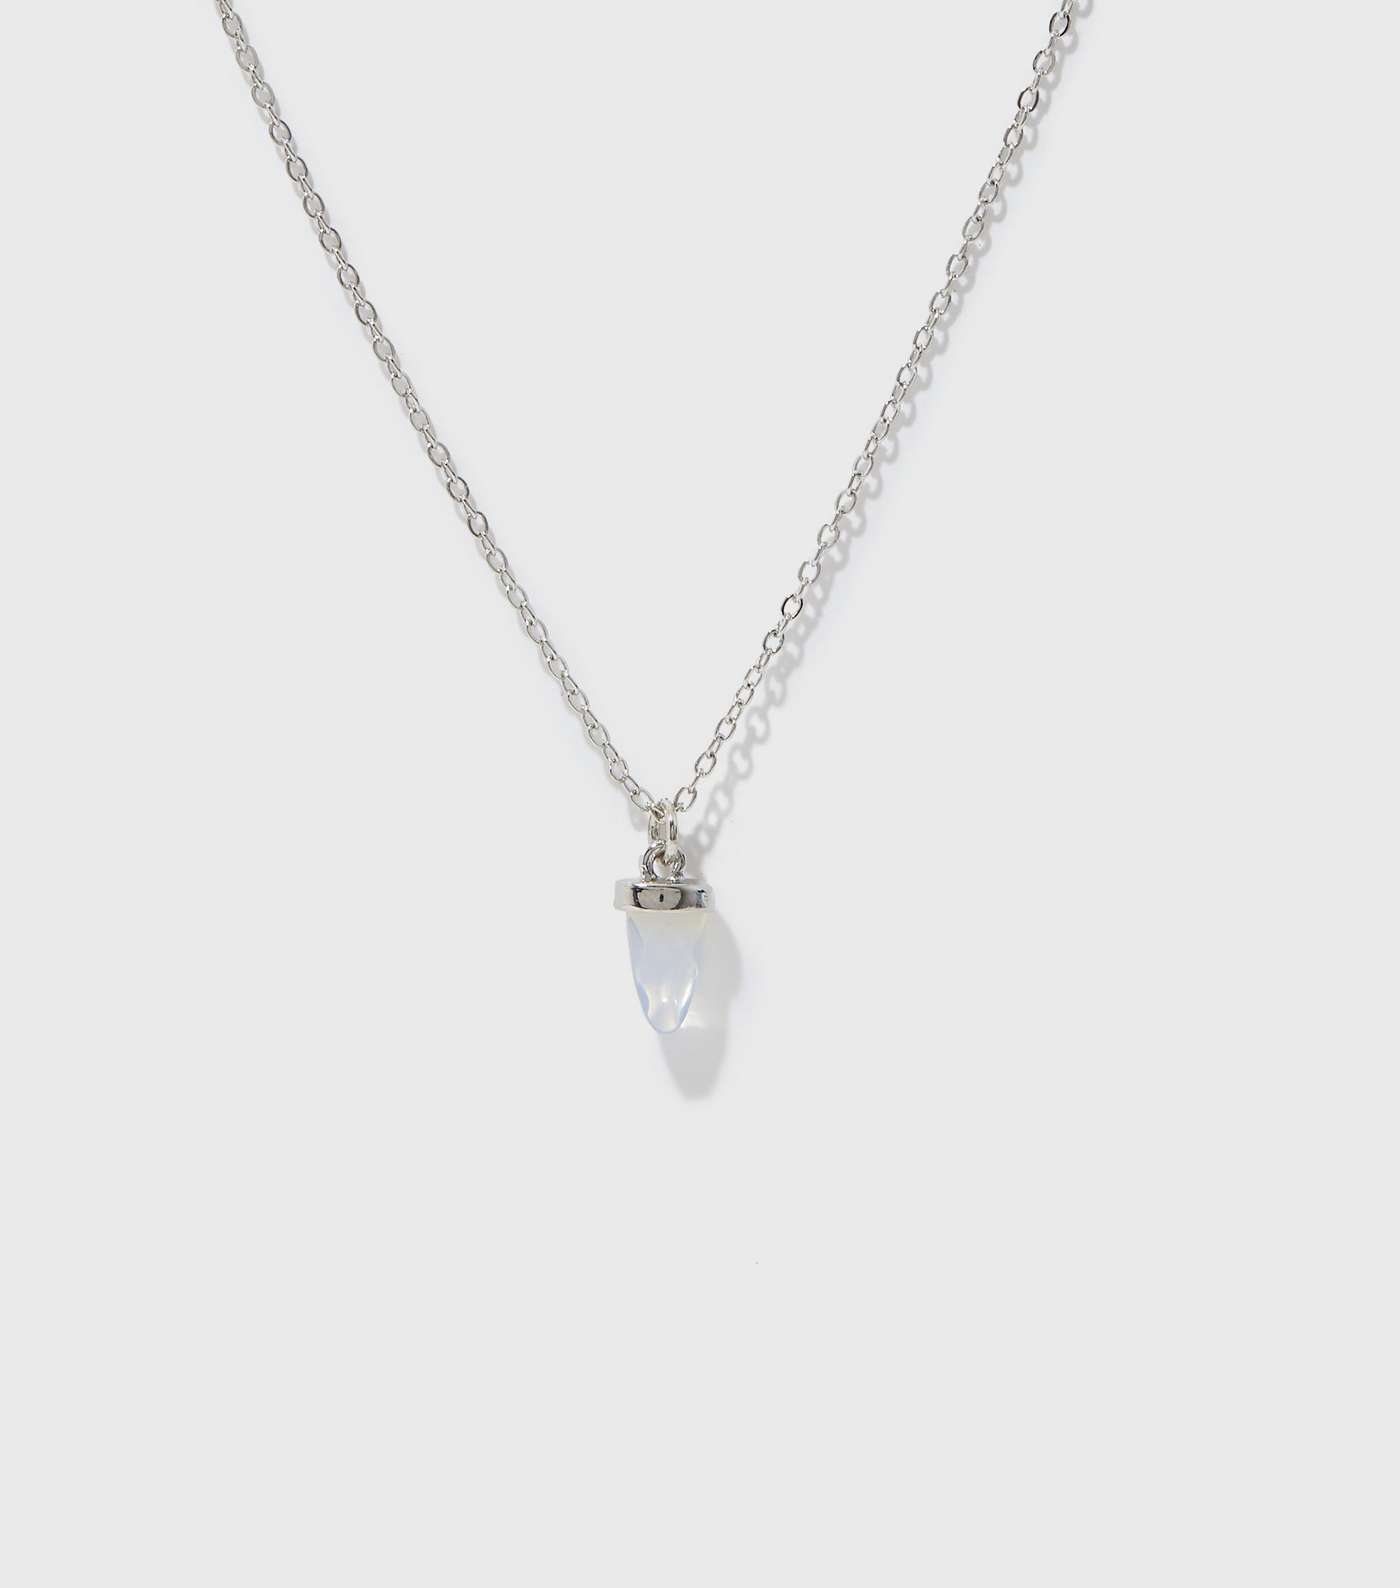 Silver Moonstone Pendant Necklace Image 2